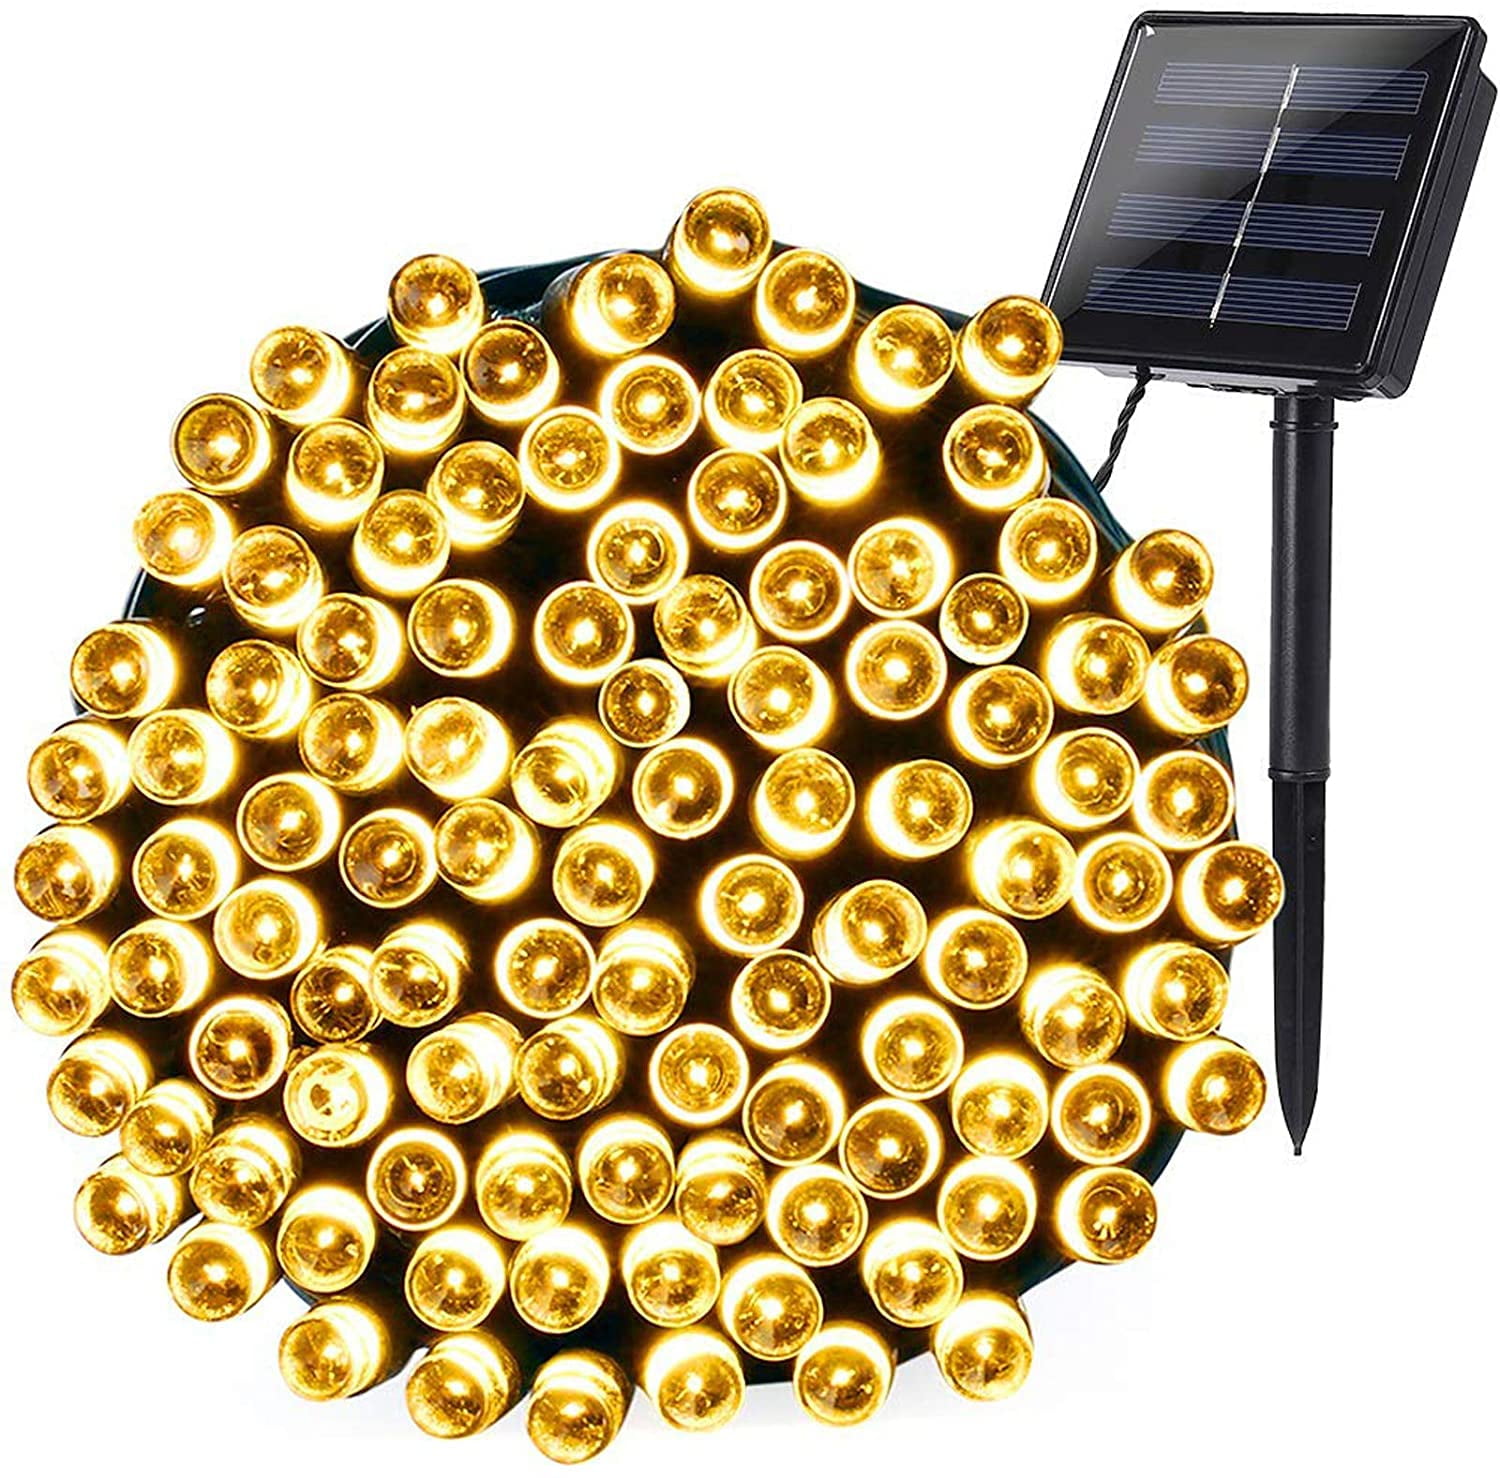 Details about   100/200 LED Solar Power Fairy Garden Lights String Outdoor Party Wedding UK 